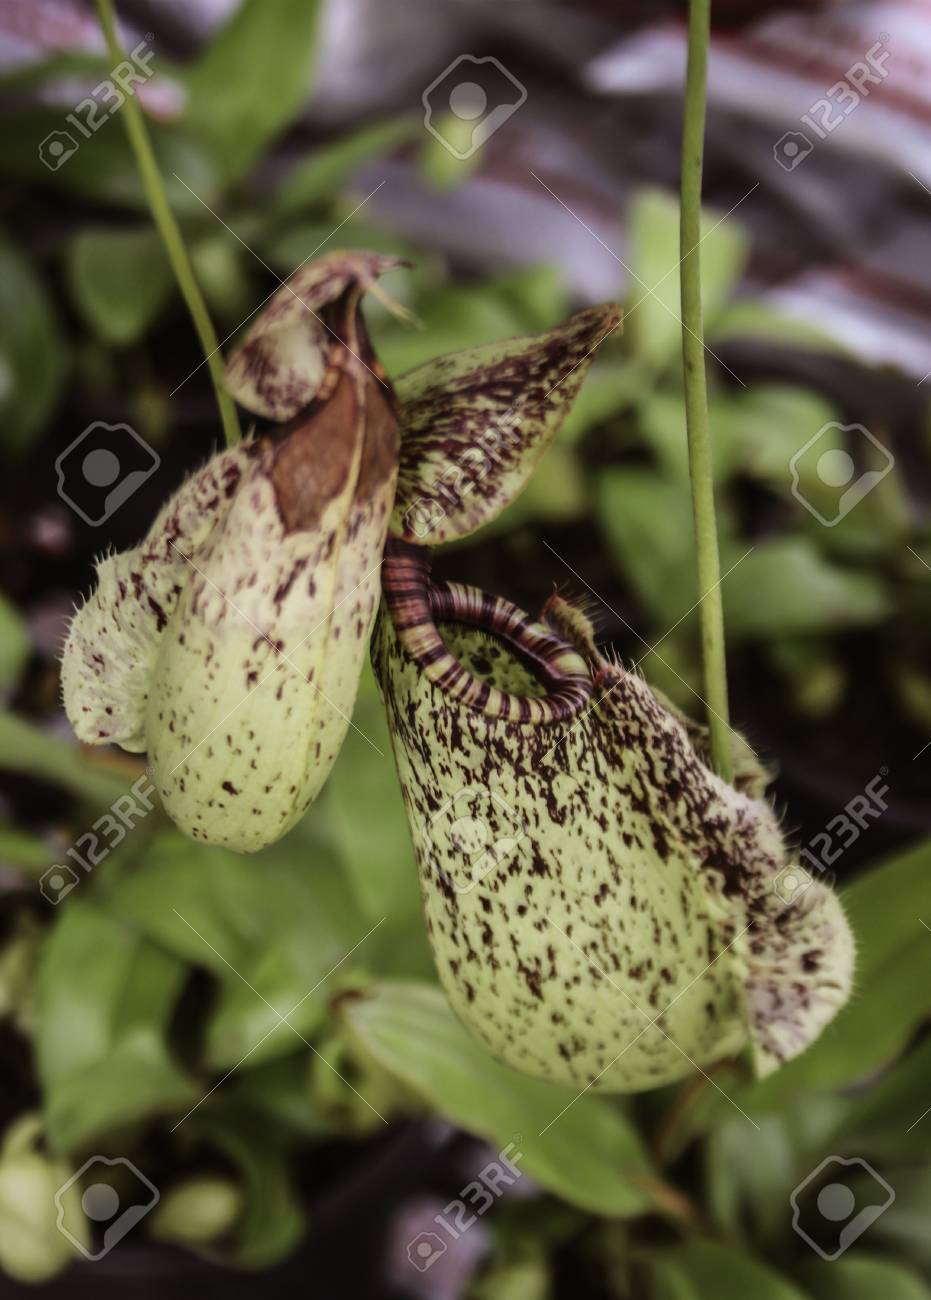 Best Closeup Of Nepenthes With Blurred Wallpaper Image